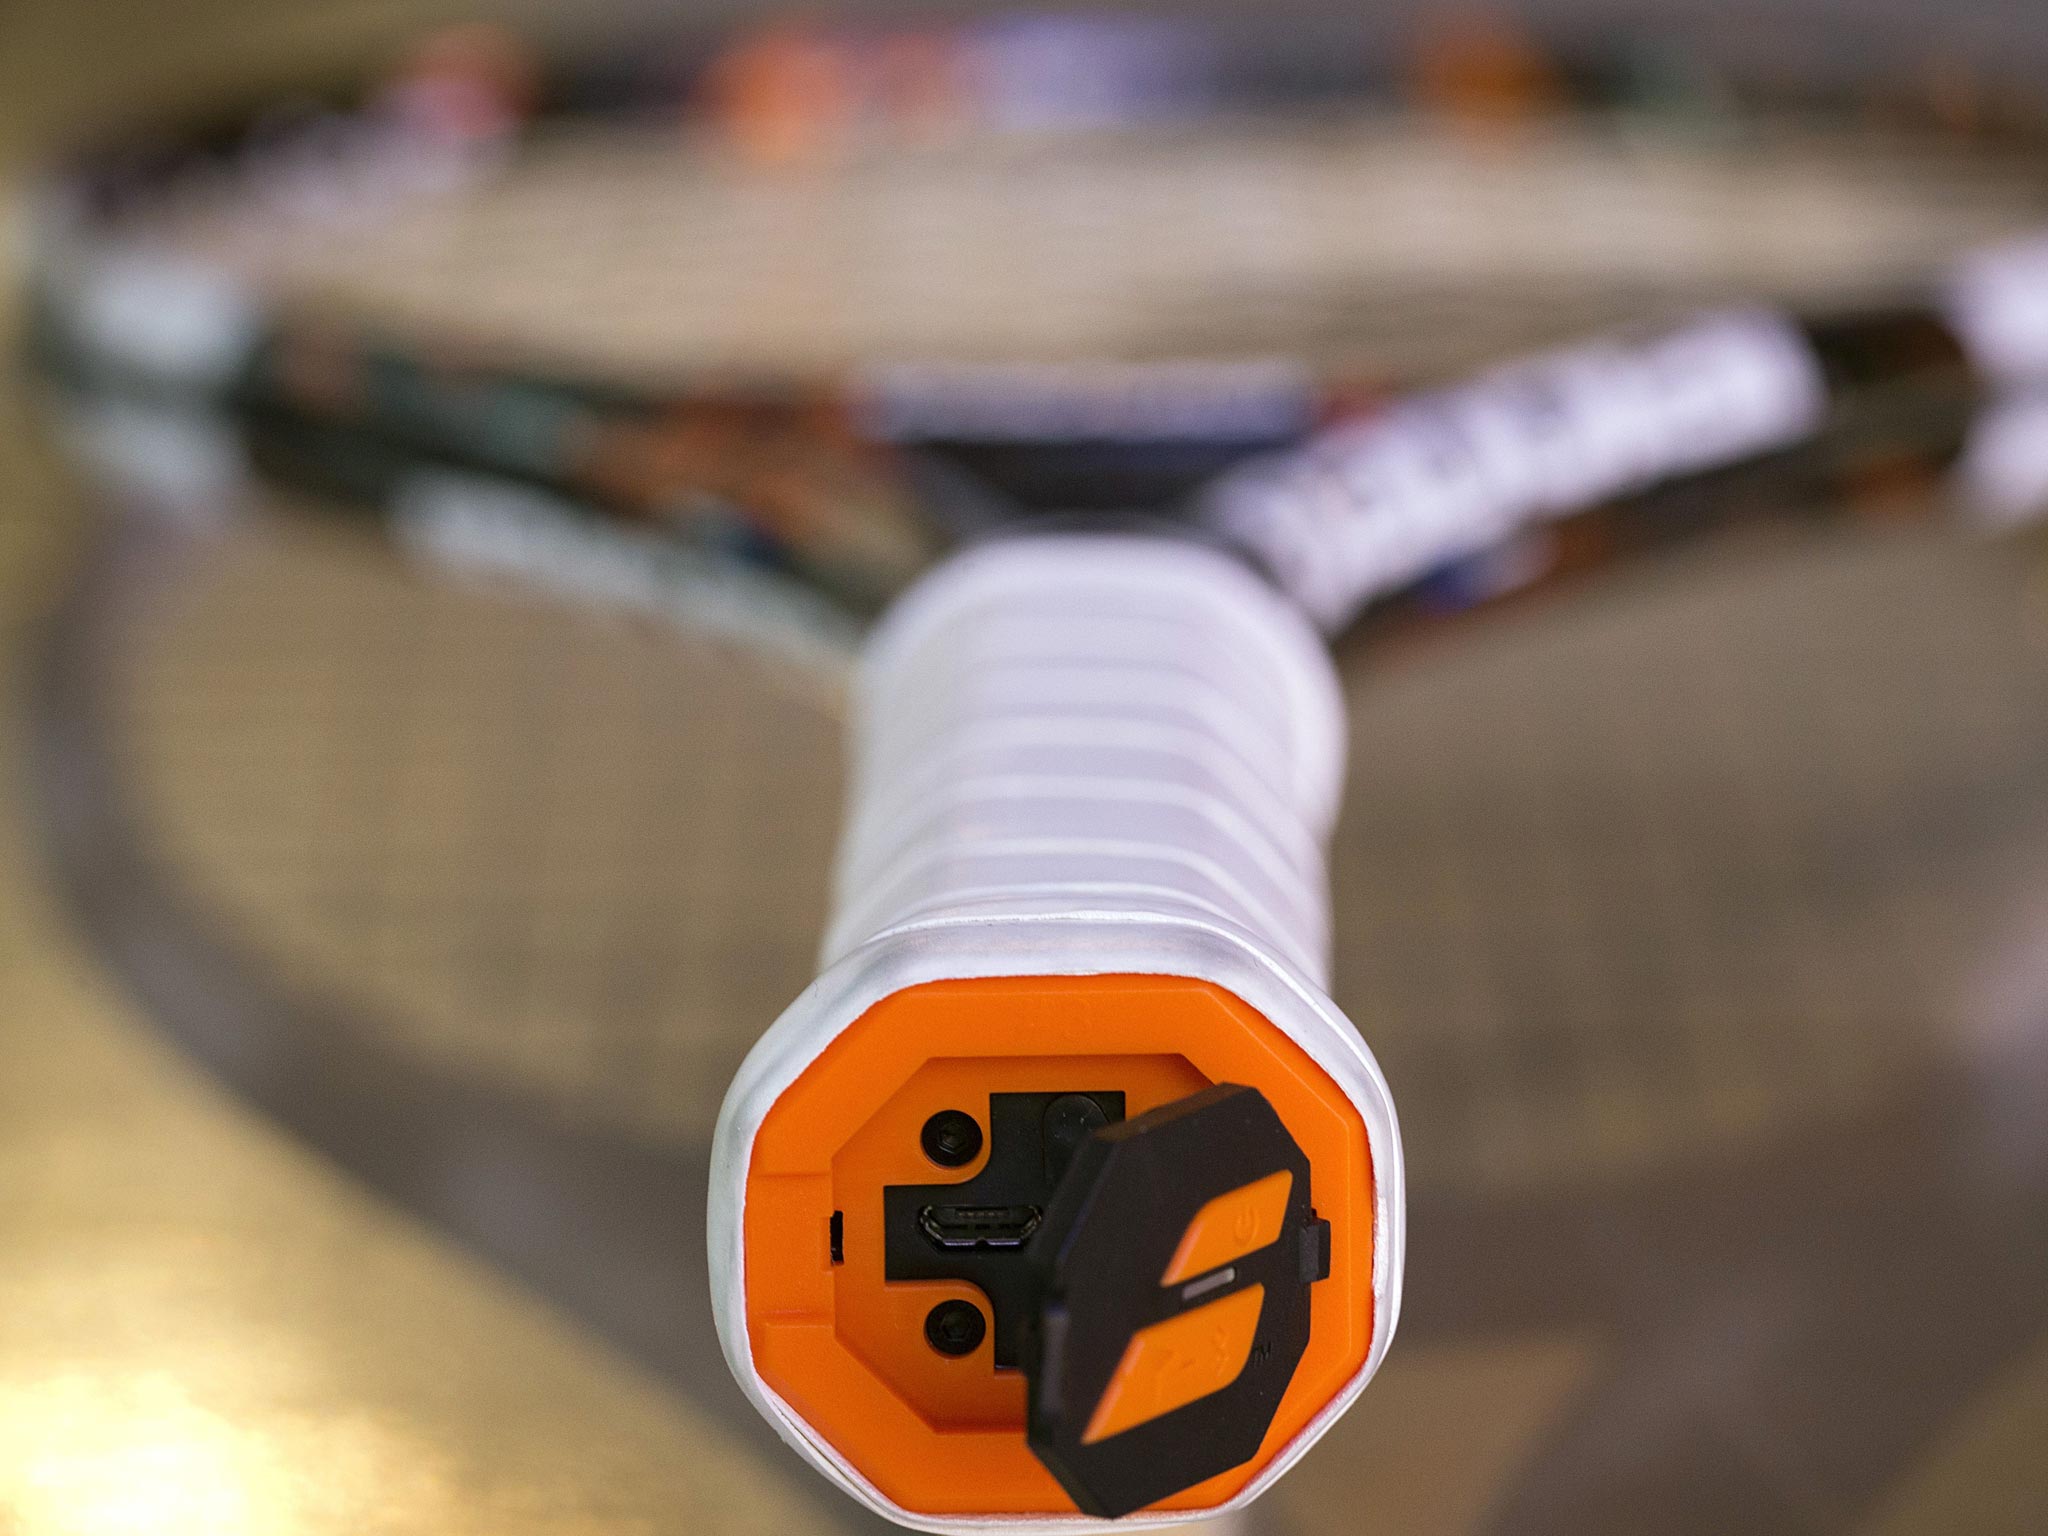 The handle of the new Babolat racket